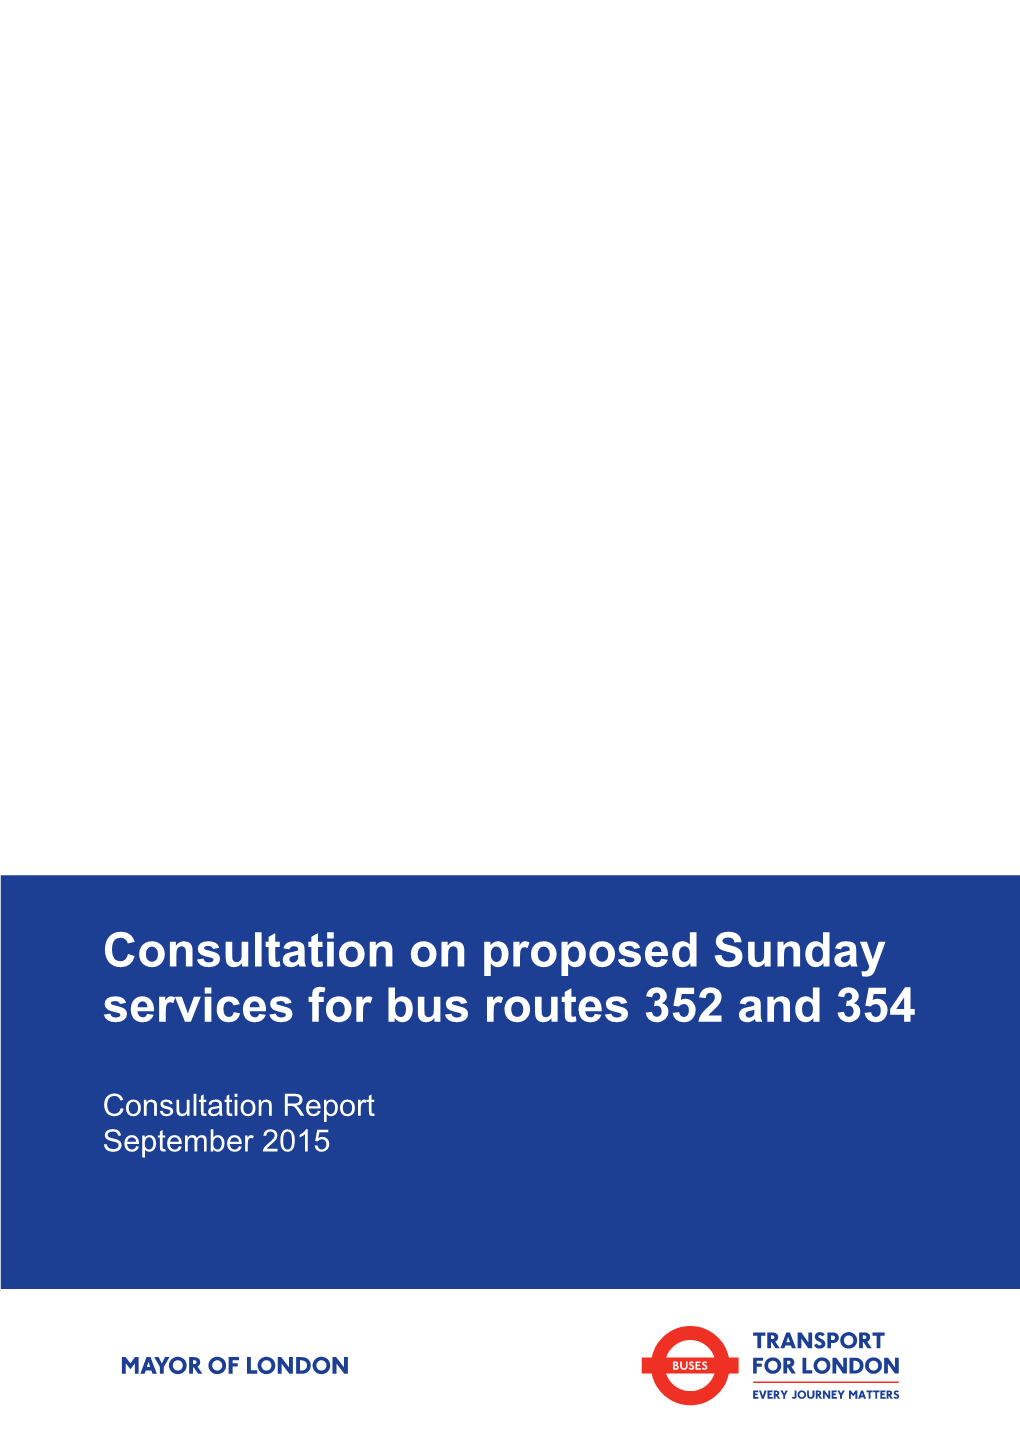 Consultation on Proposed Sunday Services for Bus Routes 352 and 354